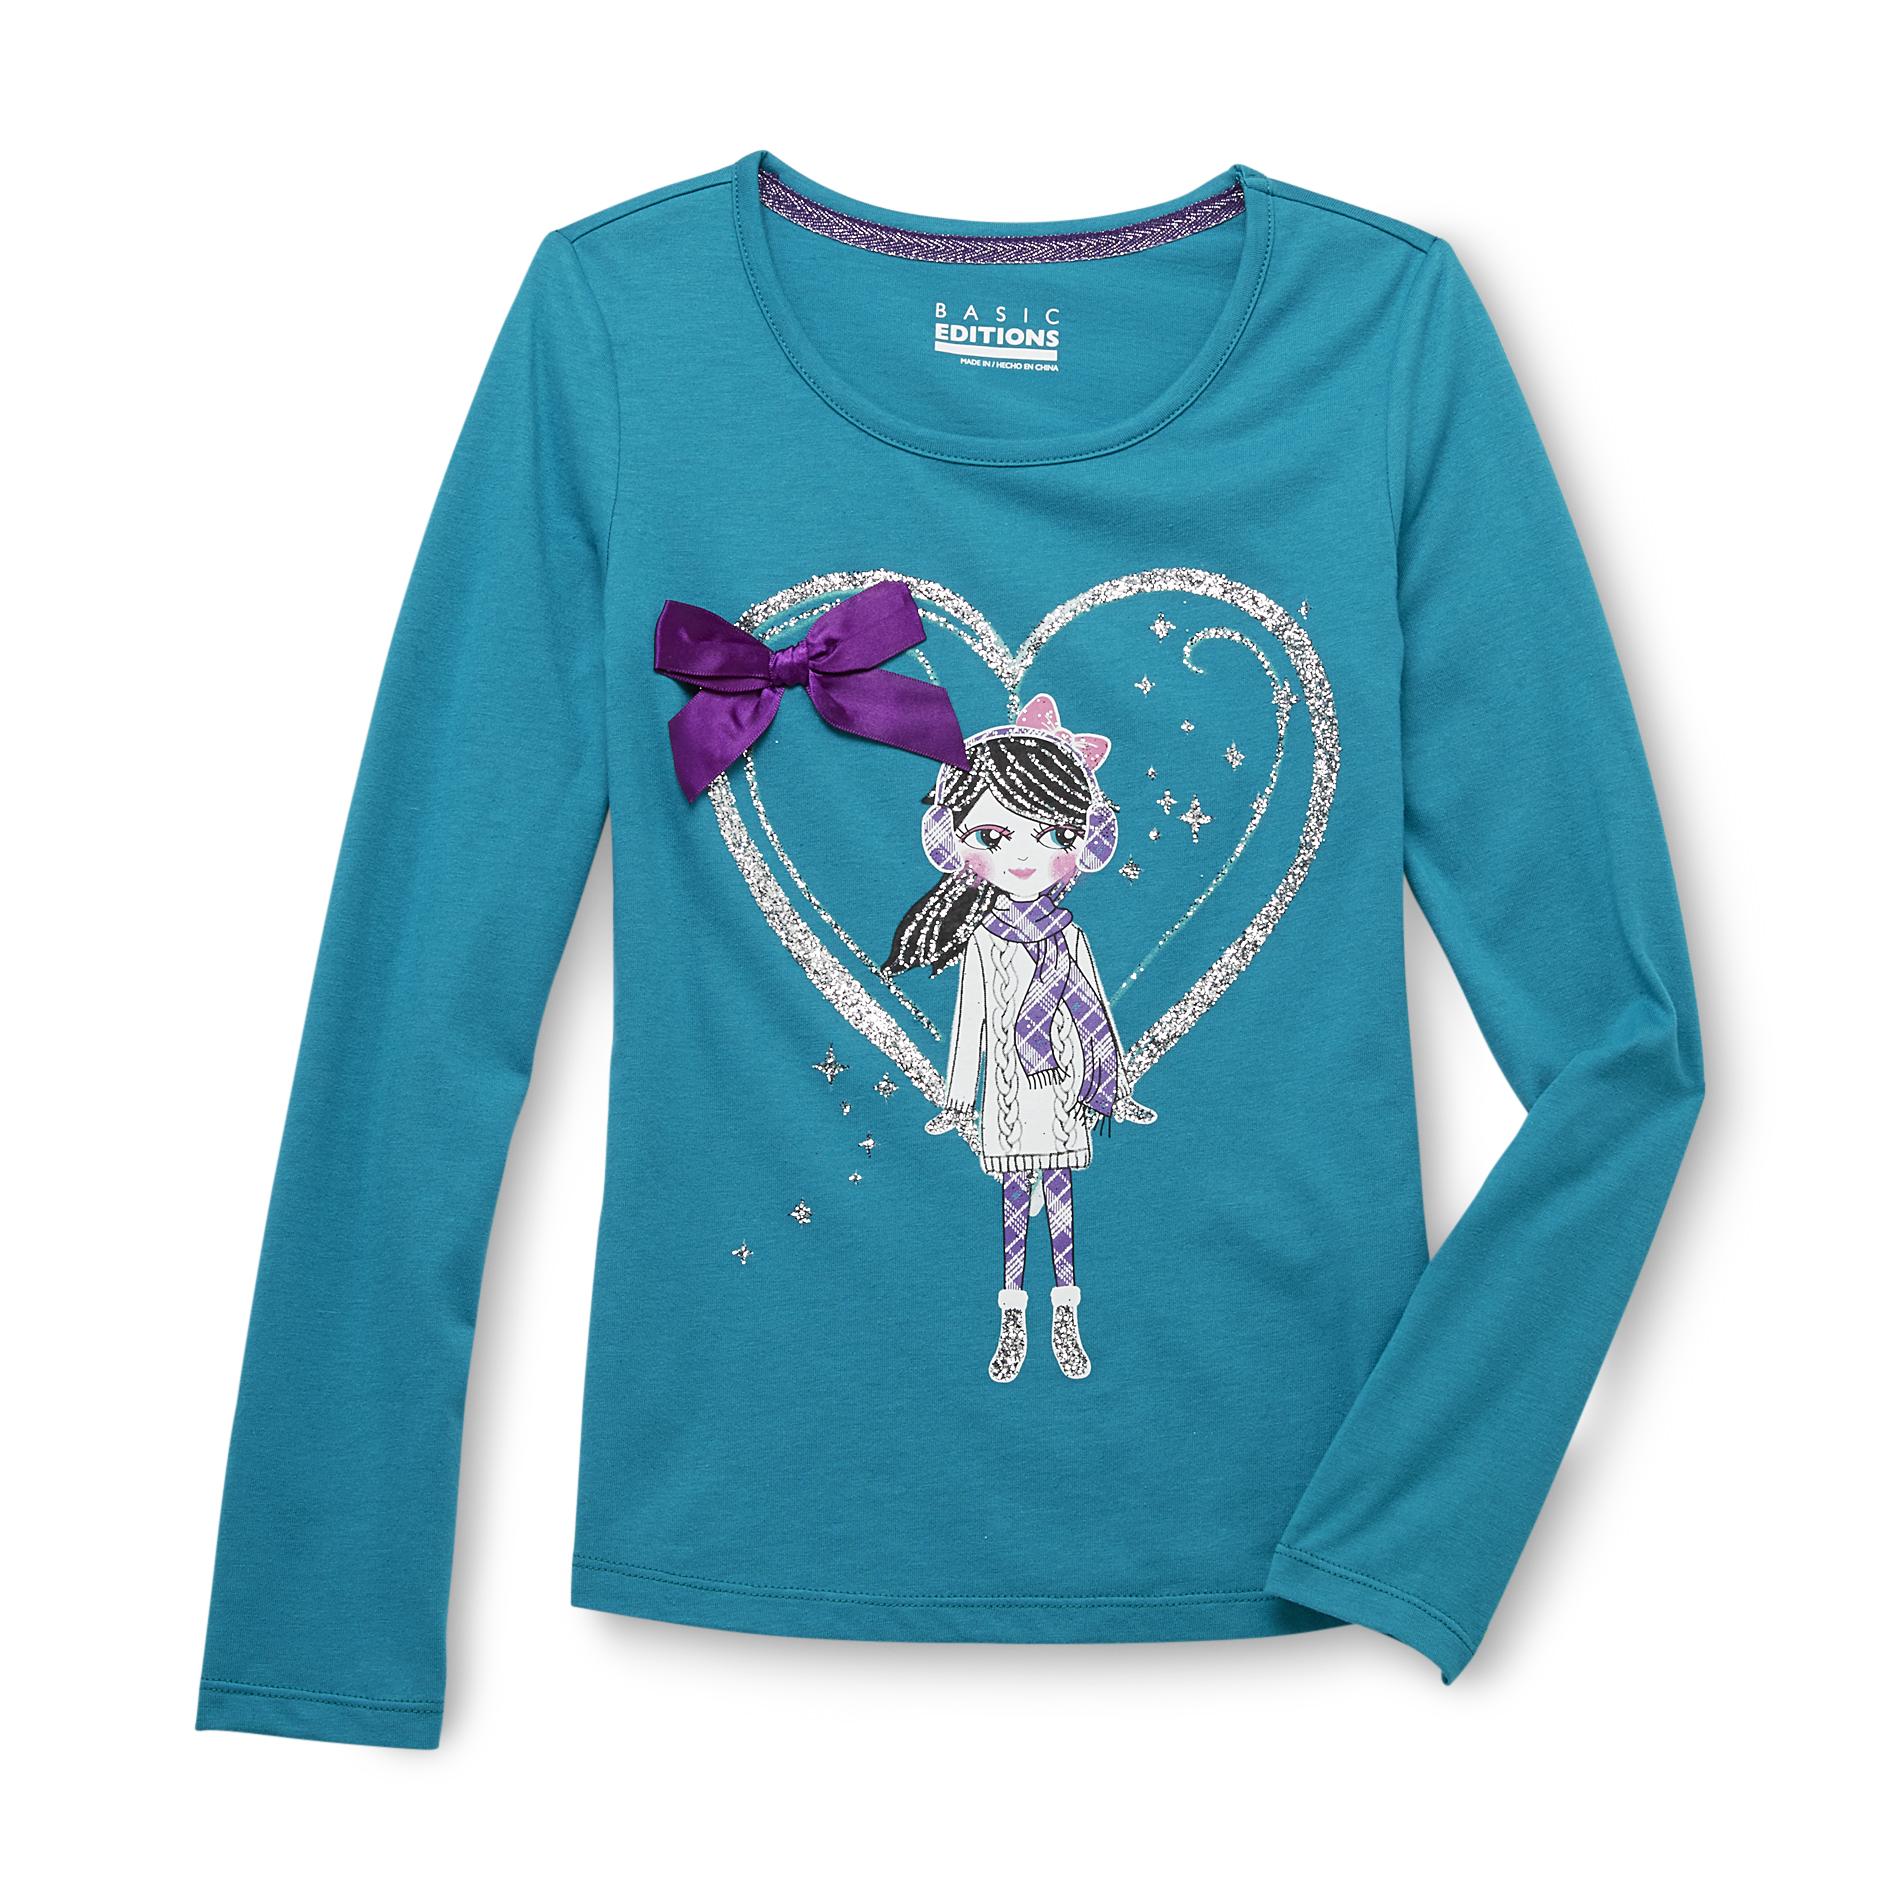 Basic Editions Girl's Graphic Top - Winter